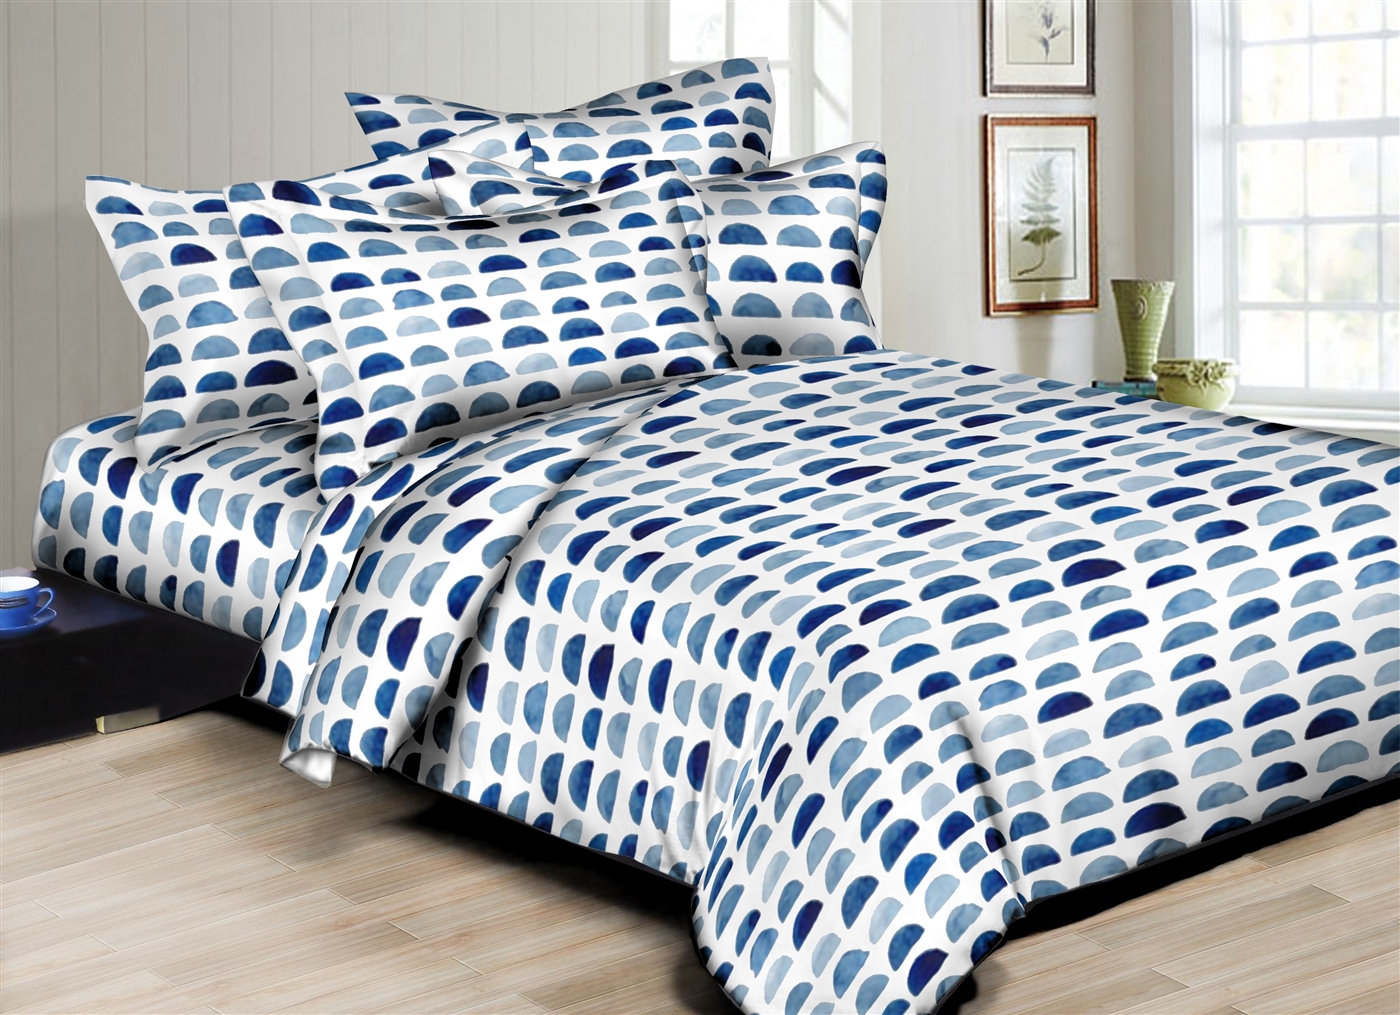 Superity Linen: Brushed Moons-Blue Twin Bedding Set